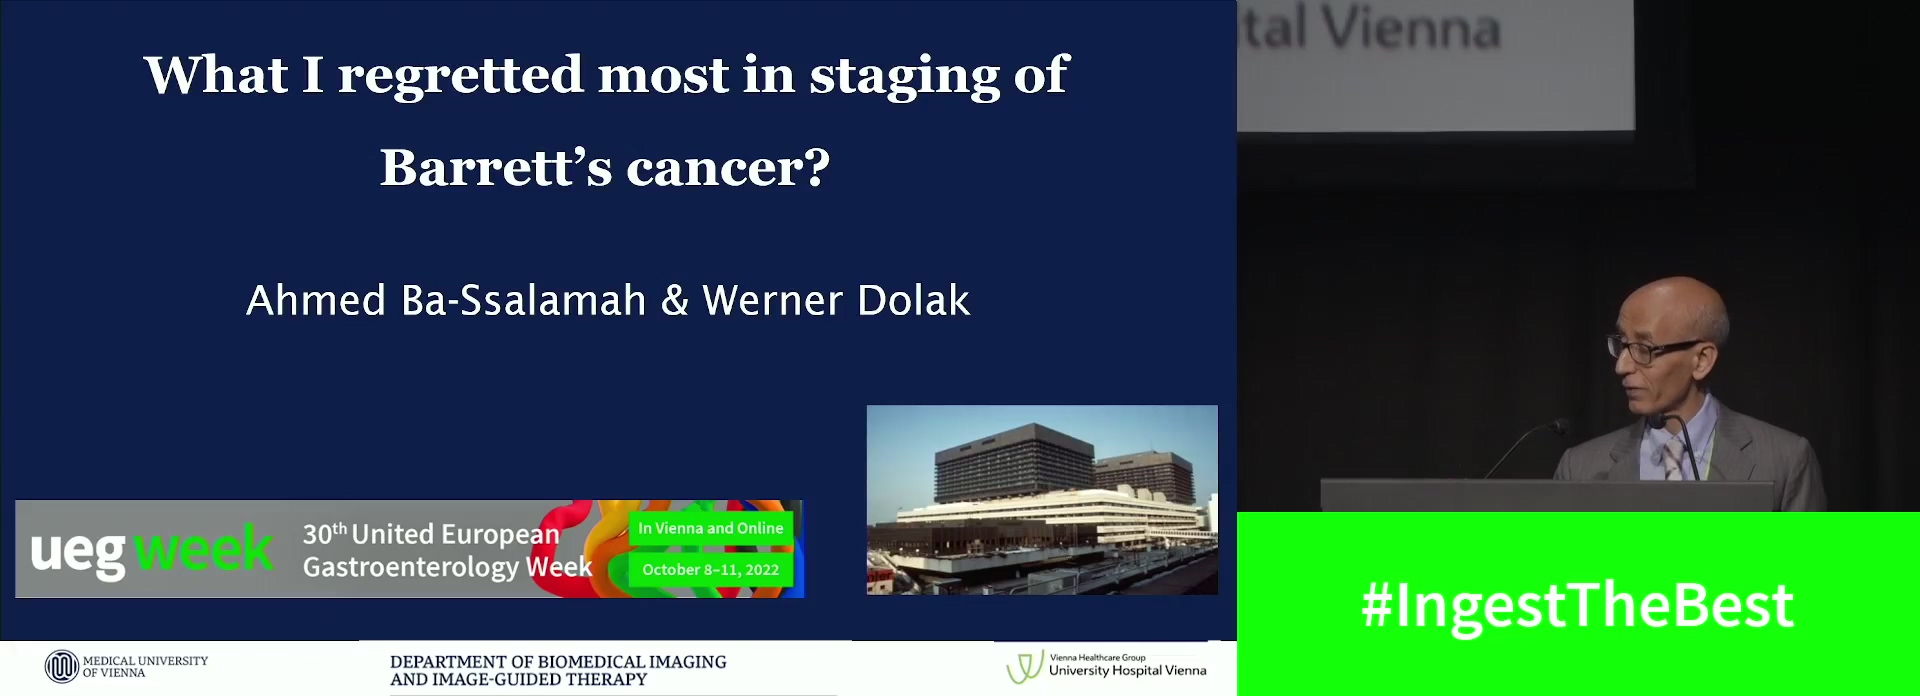 What I regretted most in staging of Barrett’s cancer